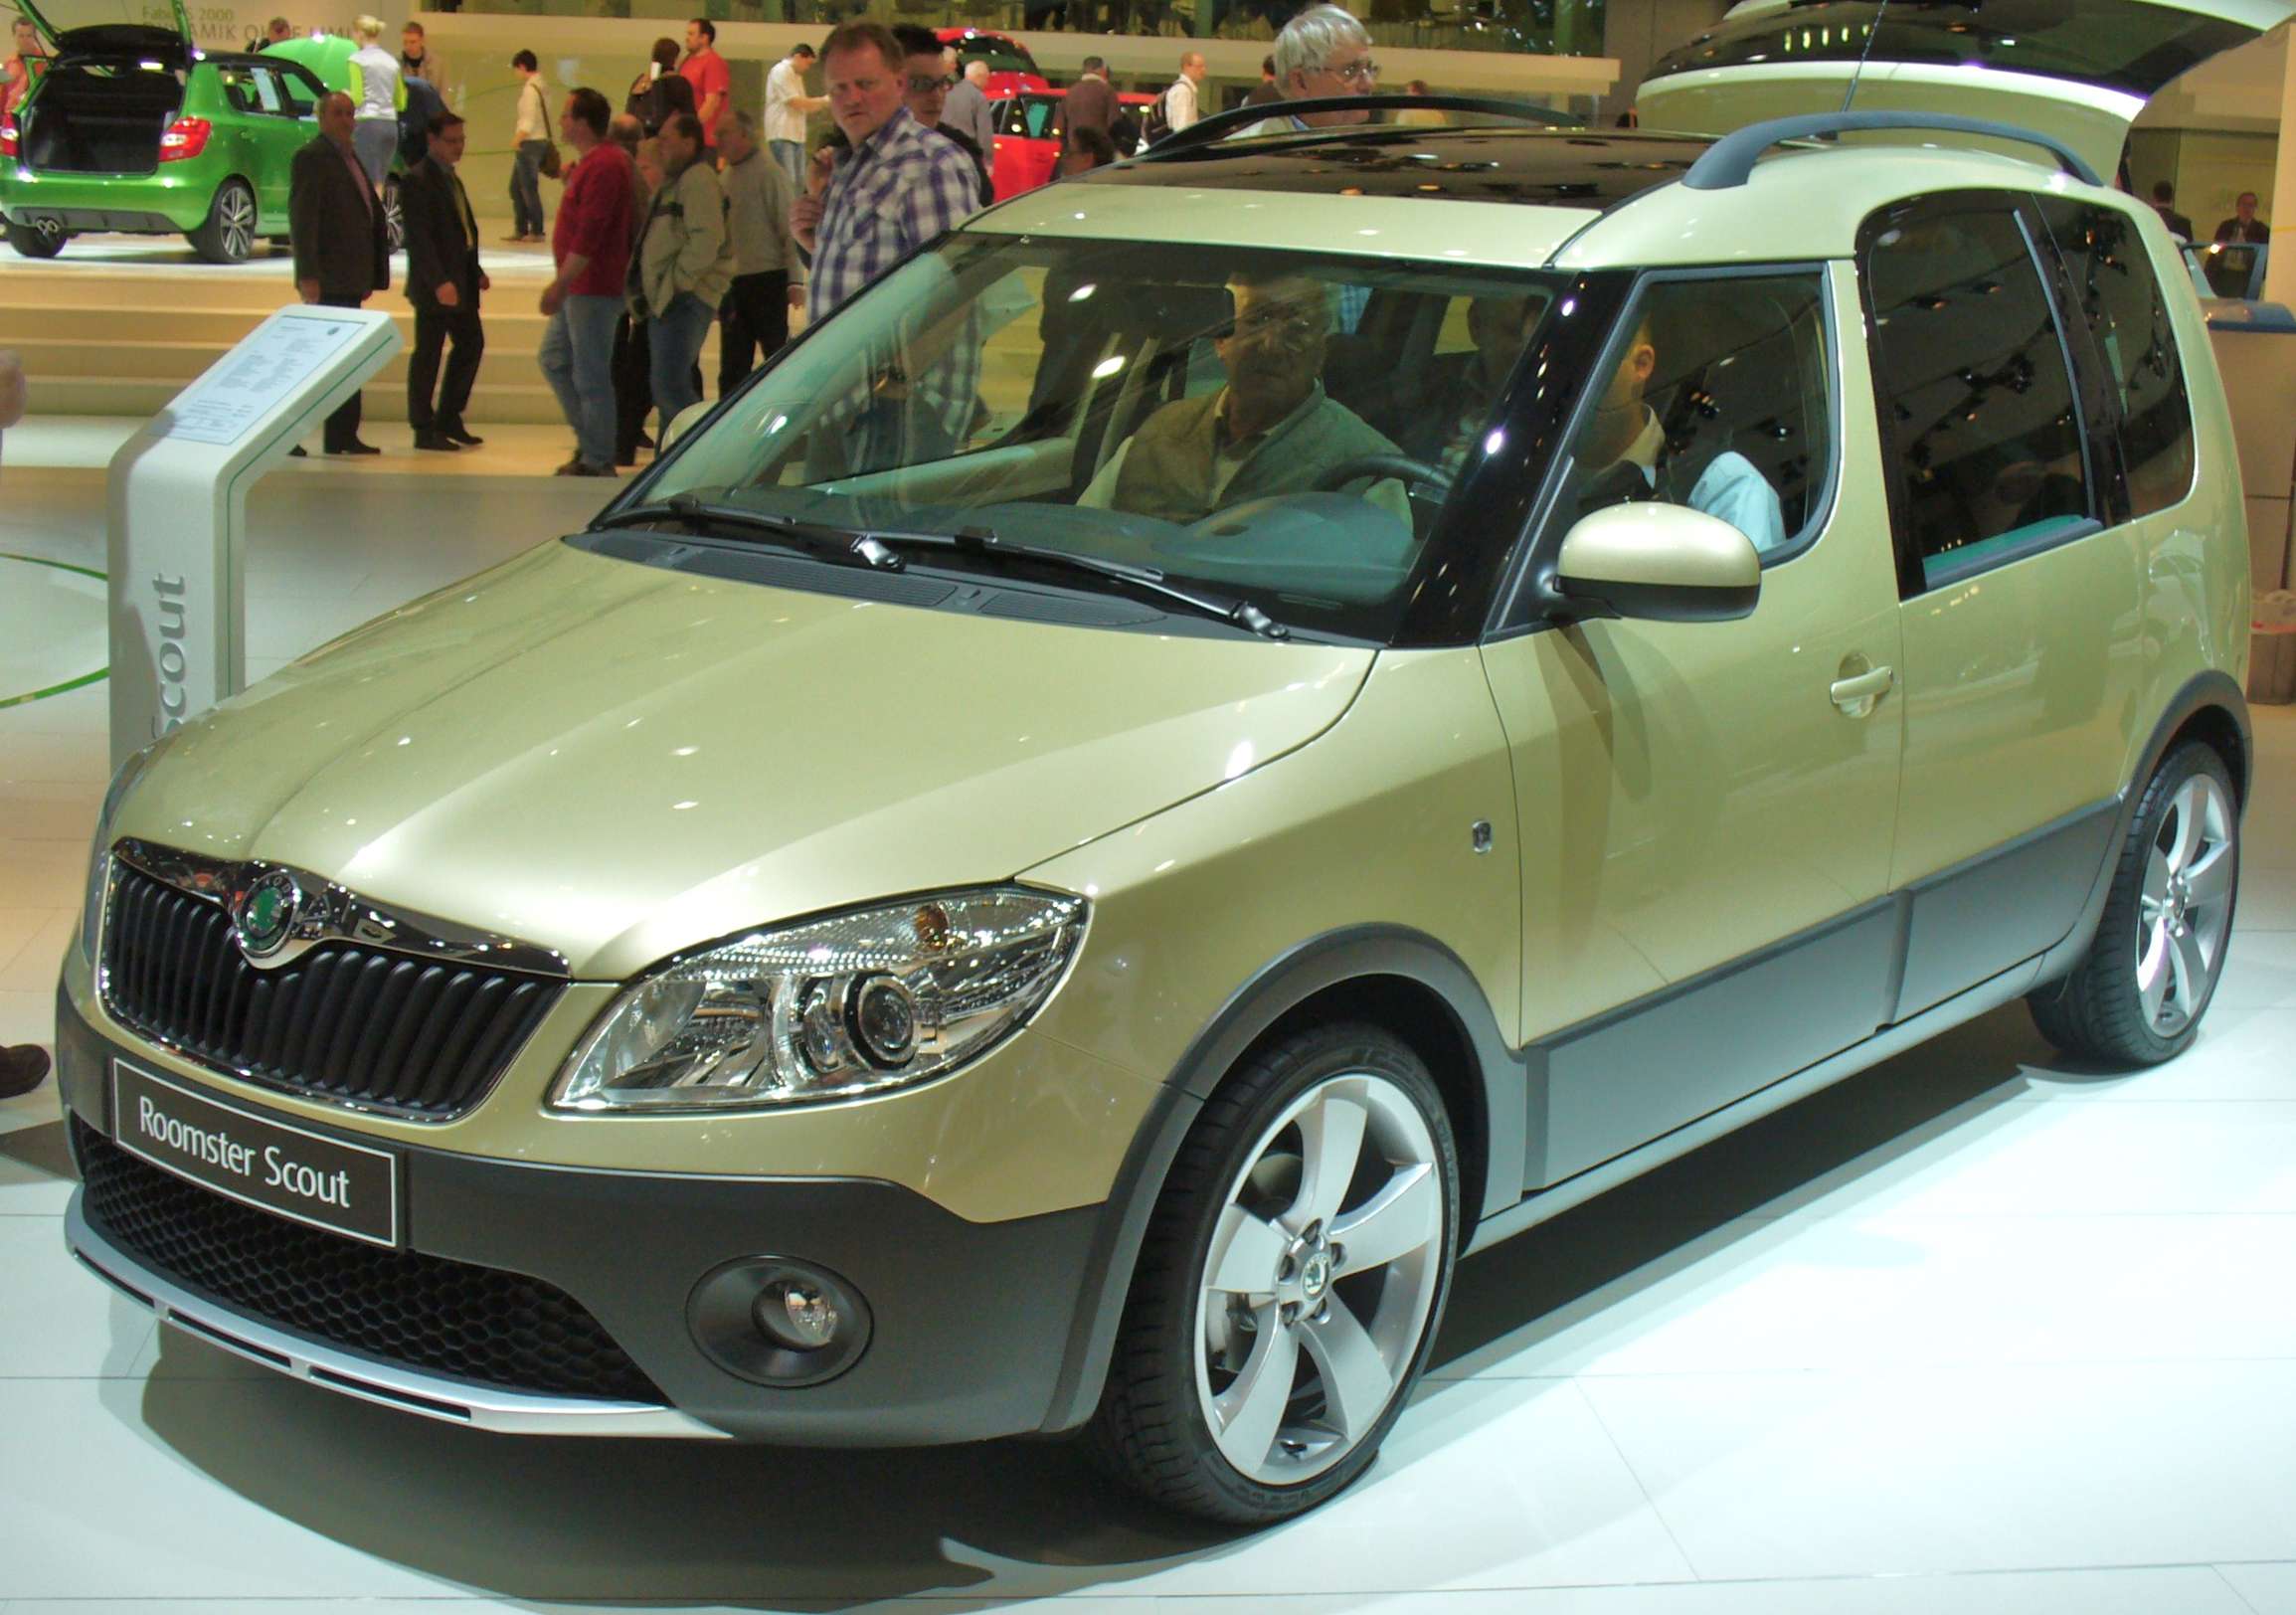 Skoda_Roomster_Scout